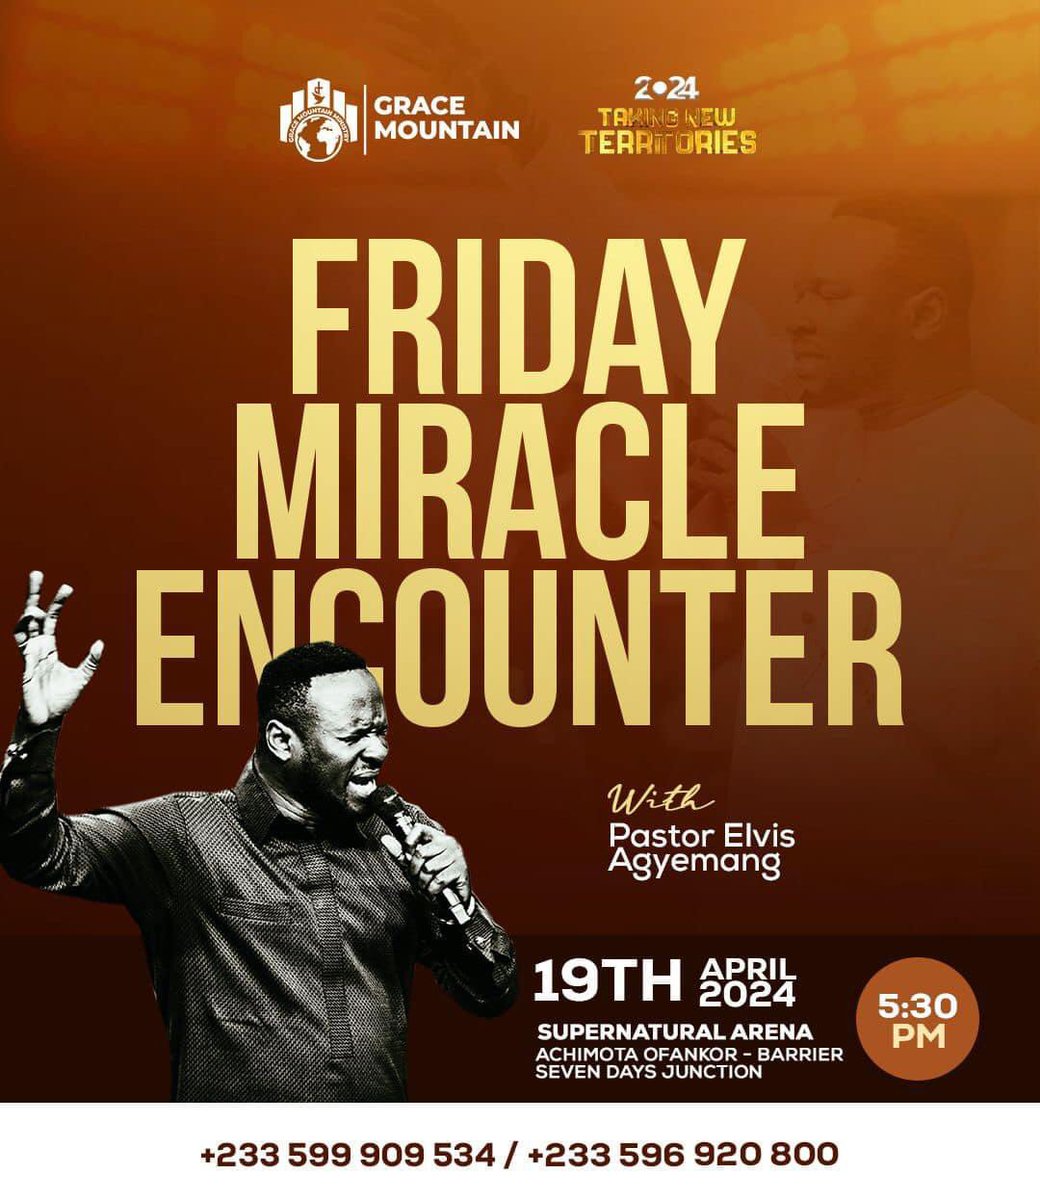 The Lord is doing great and mighty things with His church. 
Don't miss Friday Miracle Encounter tonight at exactly 5:30pm
#GraceMountainMinistry 
#PastorAgyemangElvis
#LadyMercyAgyemangElvis
#TakingNewTerritories 
#FridayMiracleEncounter
#SupernaturalArena
#PrayerAndWonderCity